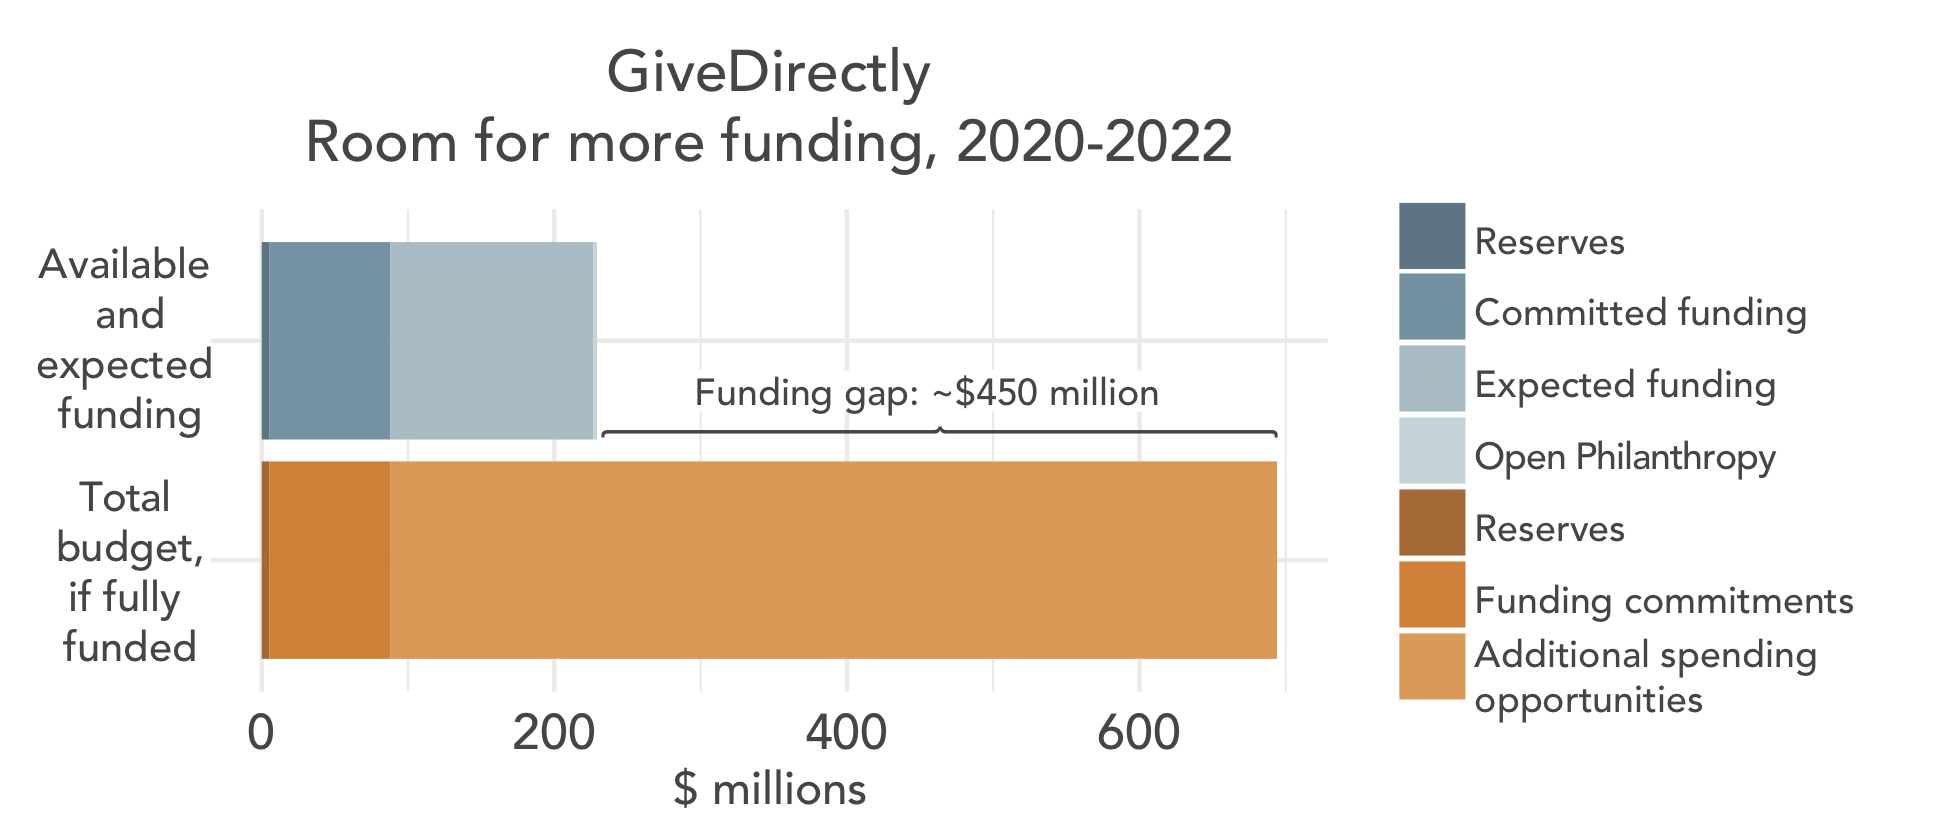 Room for more funding for GiveDirectly 2020-2022